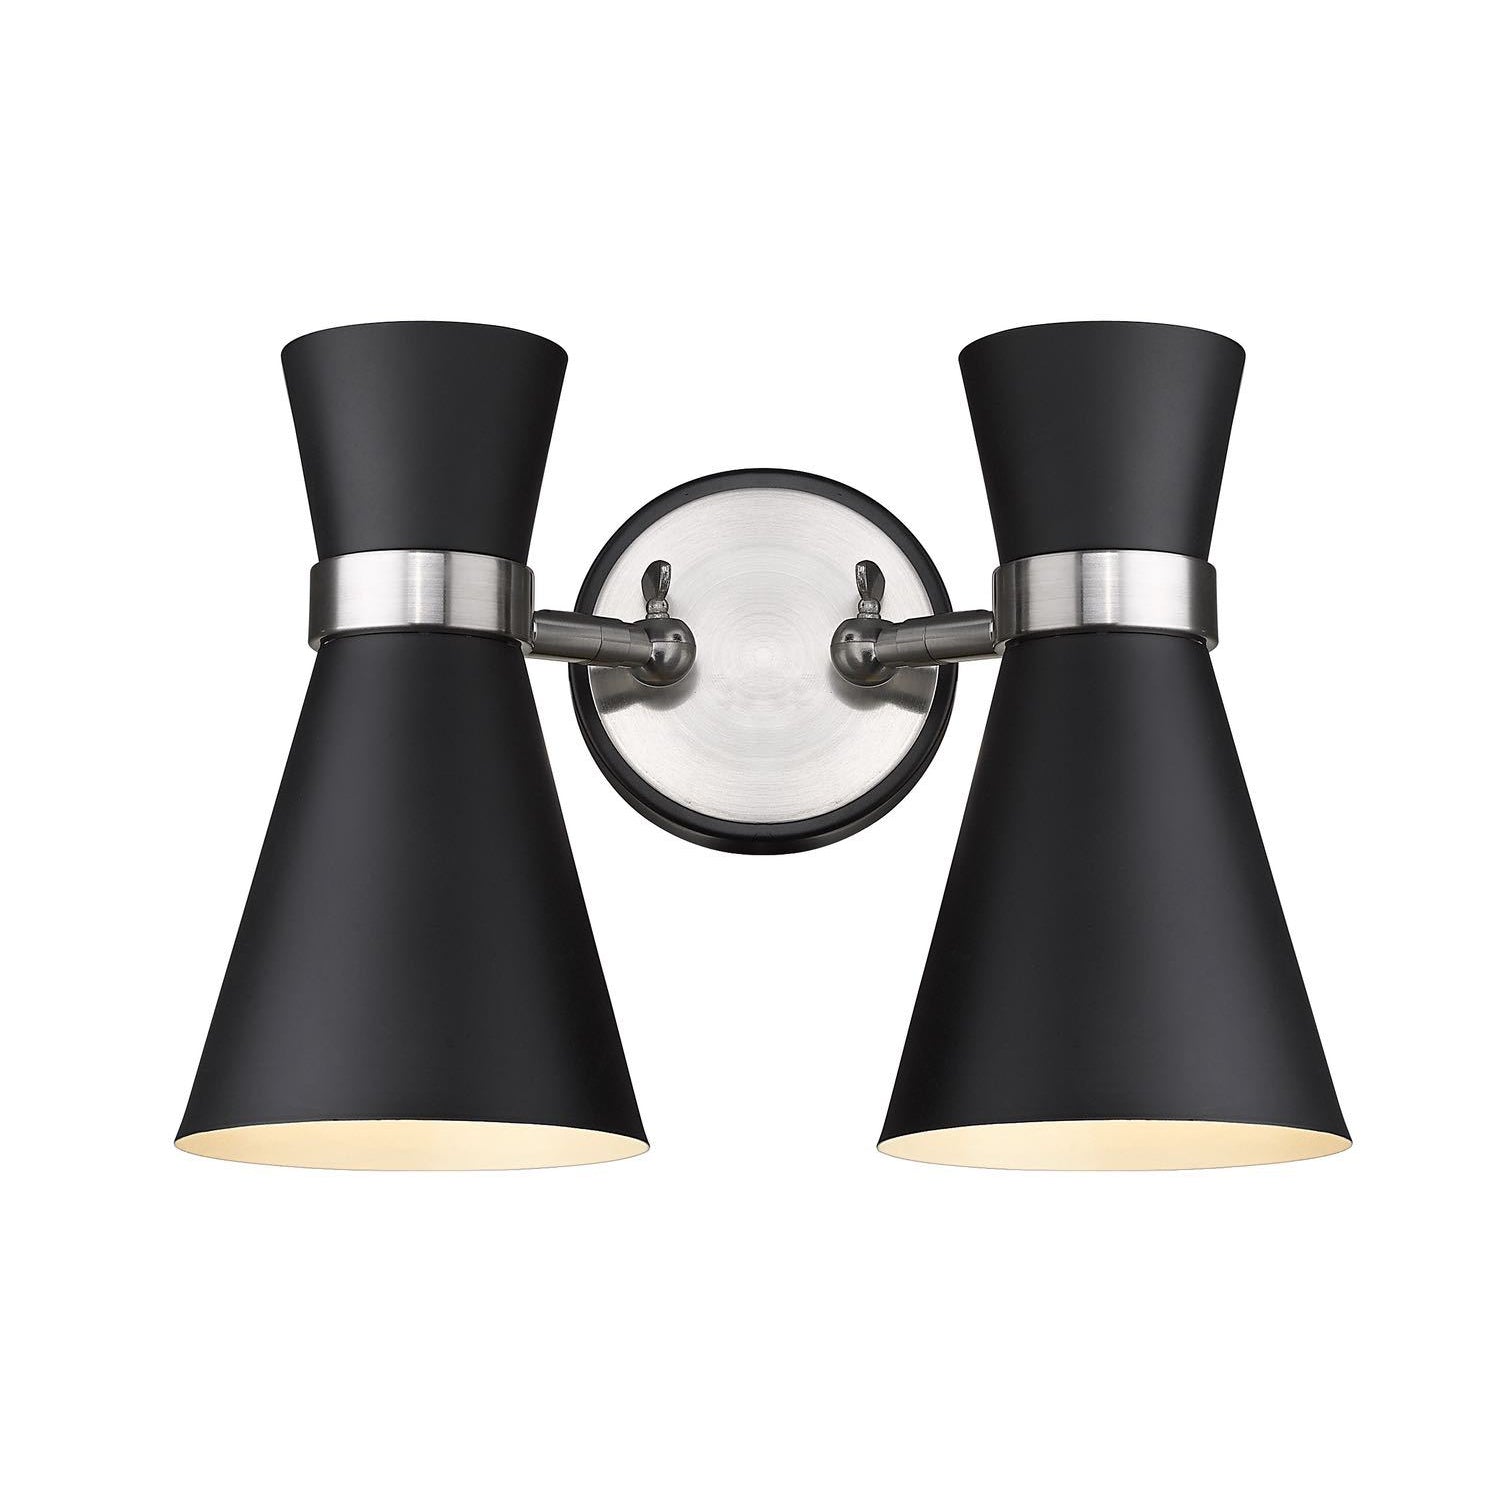 Soriano Wall Sconce Matte Black + Brushed Nickel